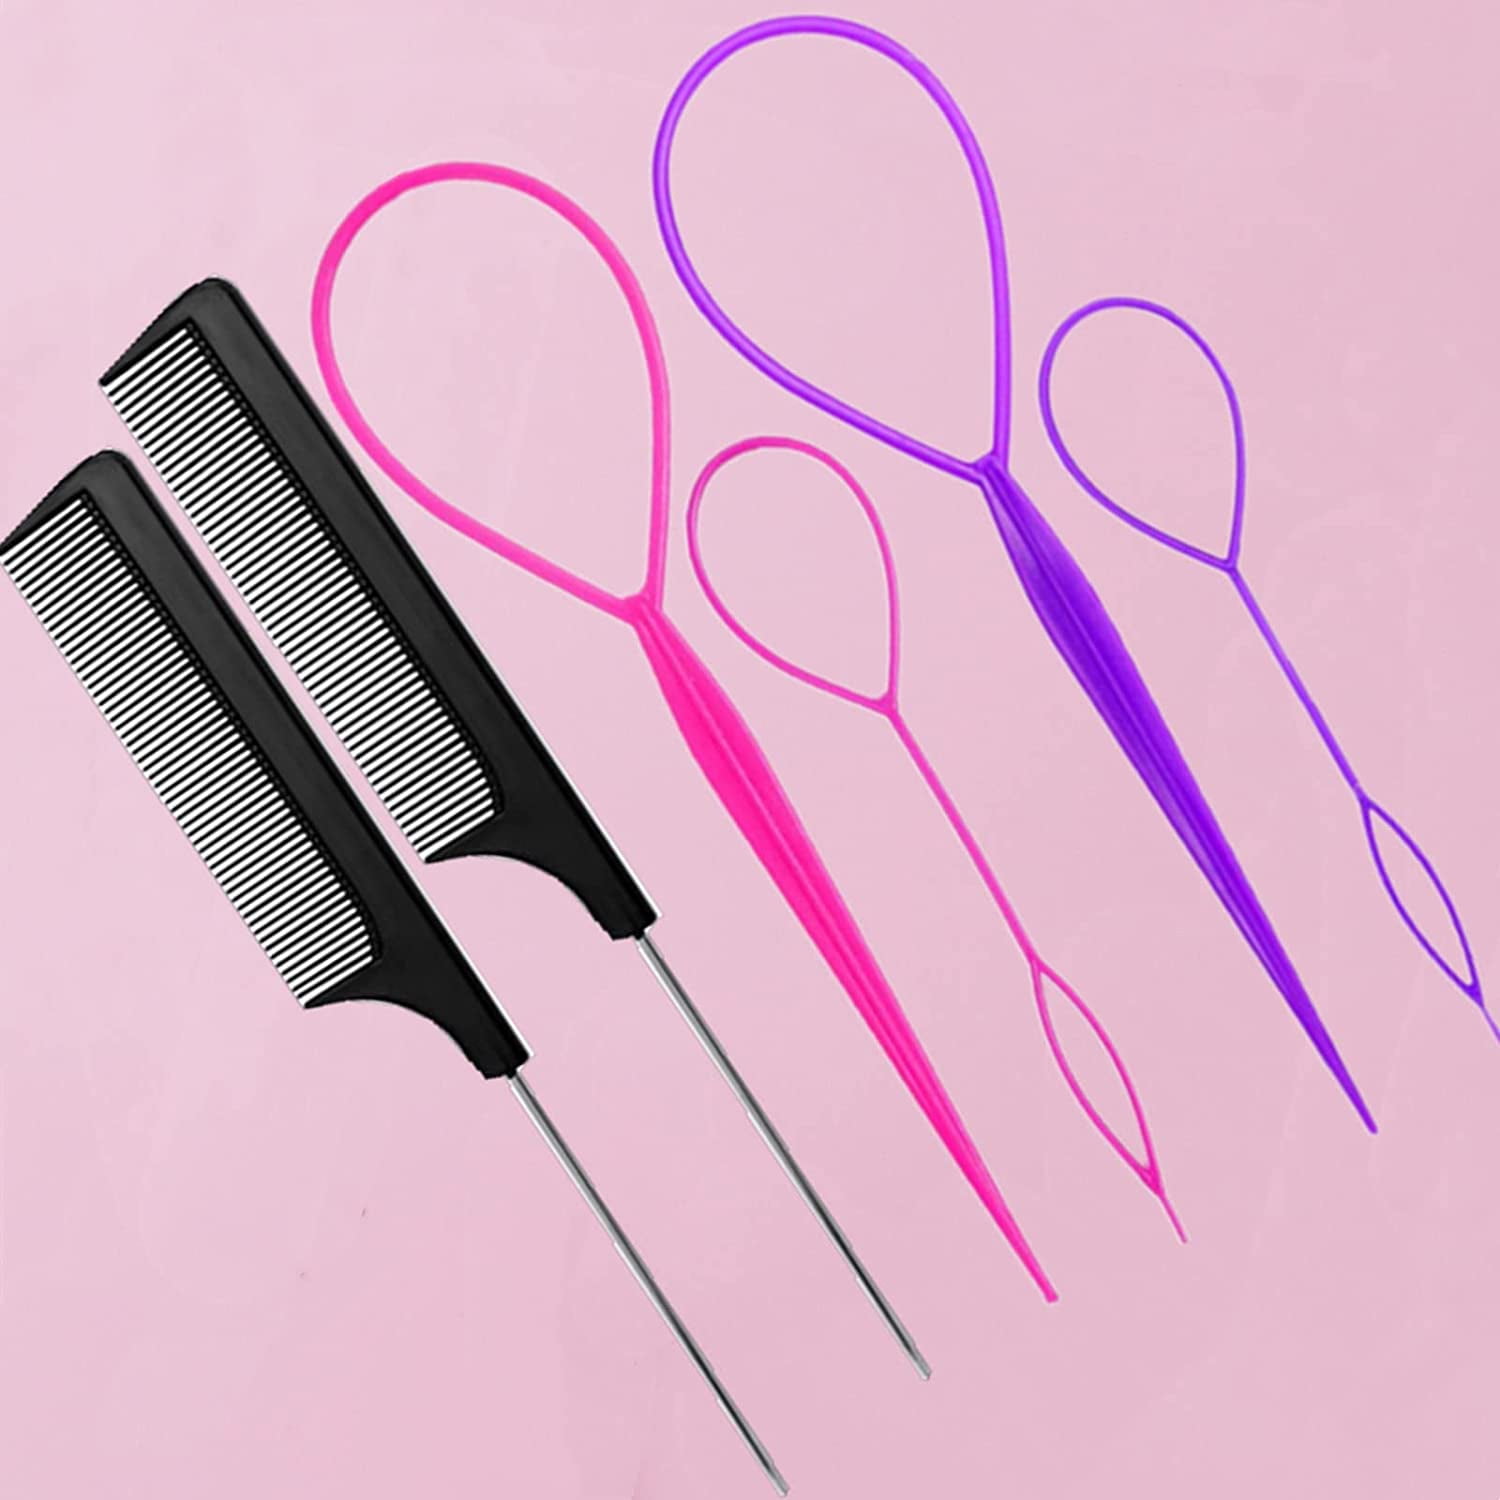 4pcs/set French Braid Tool Loop Elastic Hair Bands Remover Cutter Rat Tail  Comb Metal Pin Tail Braiding Combs for Hair Styling - AliExpress